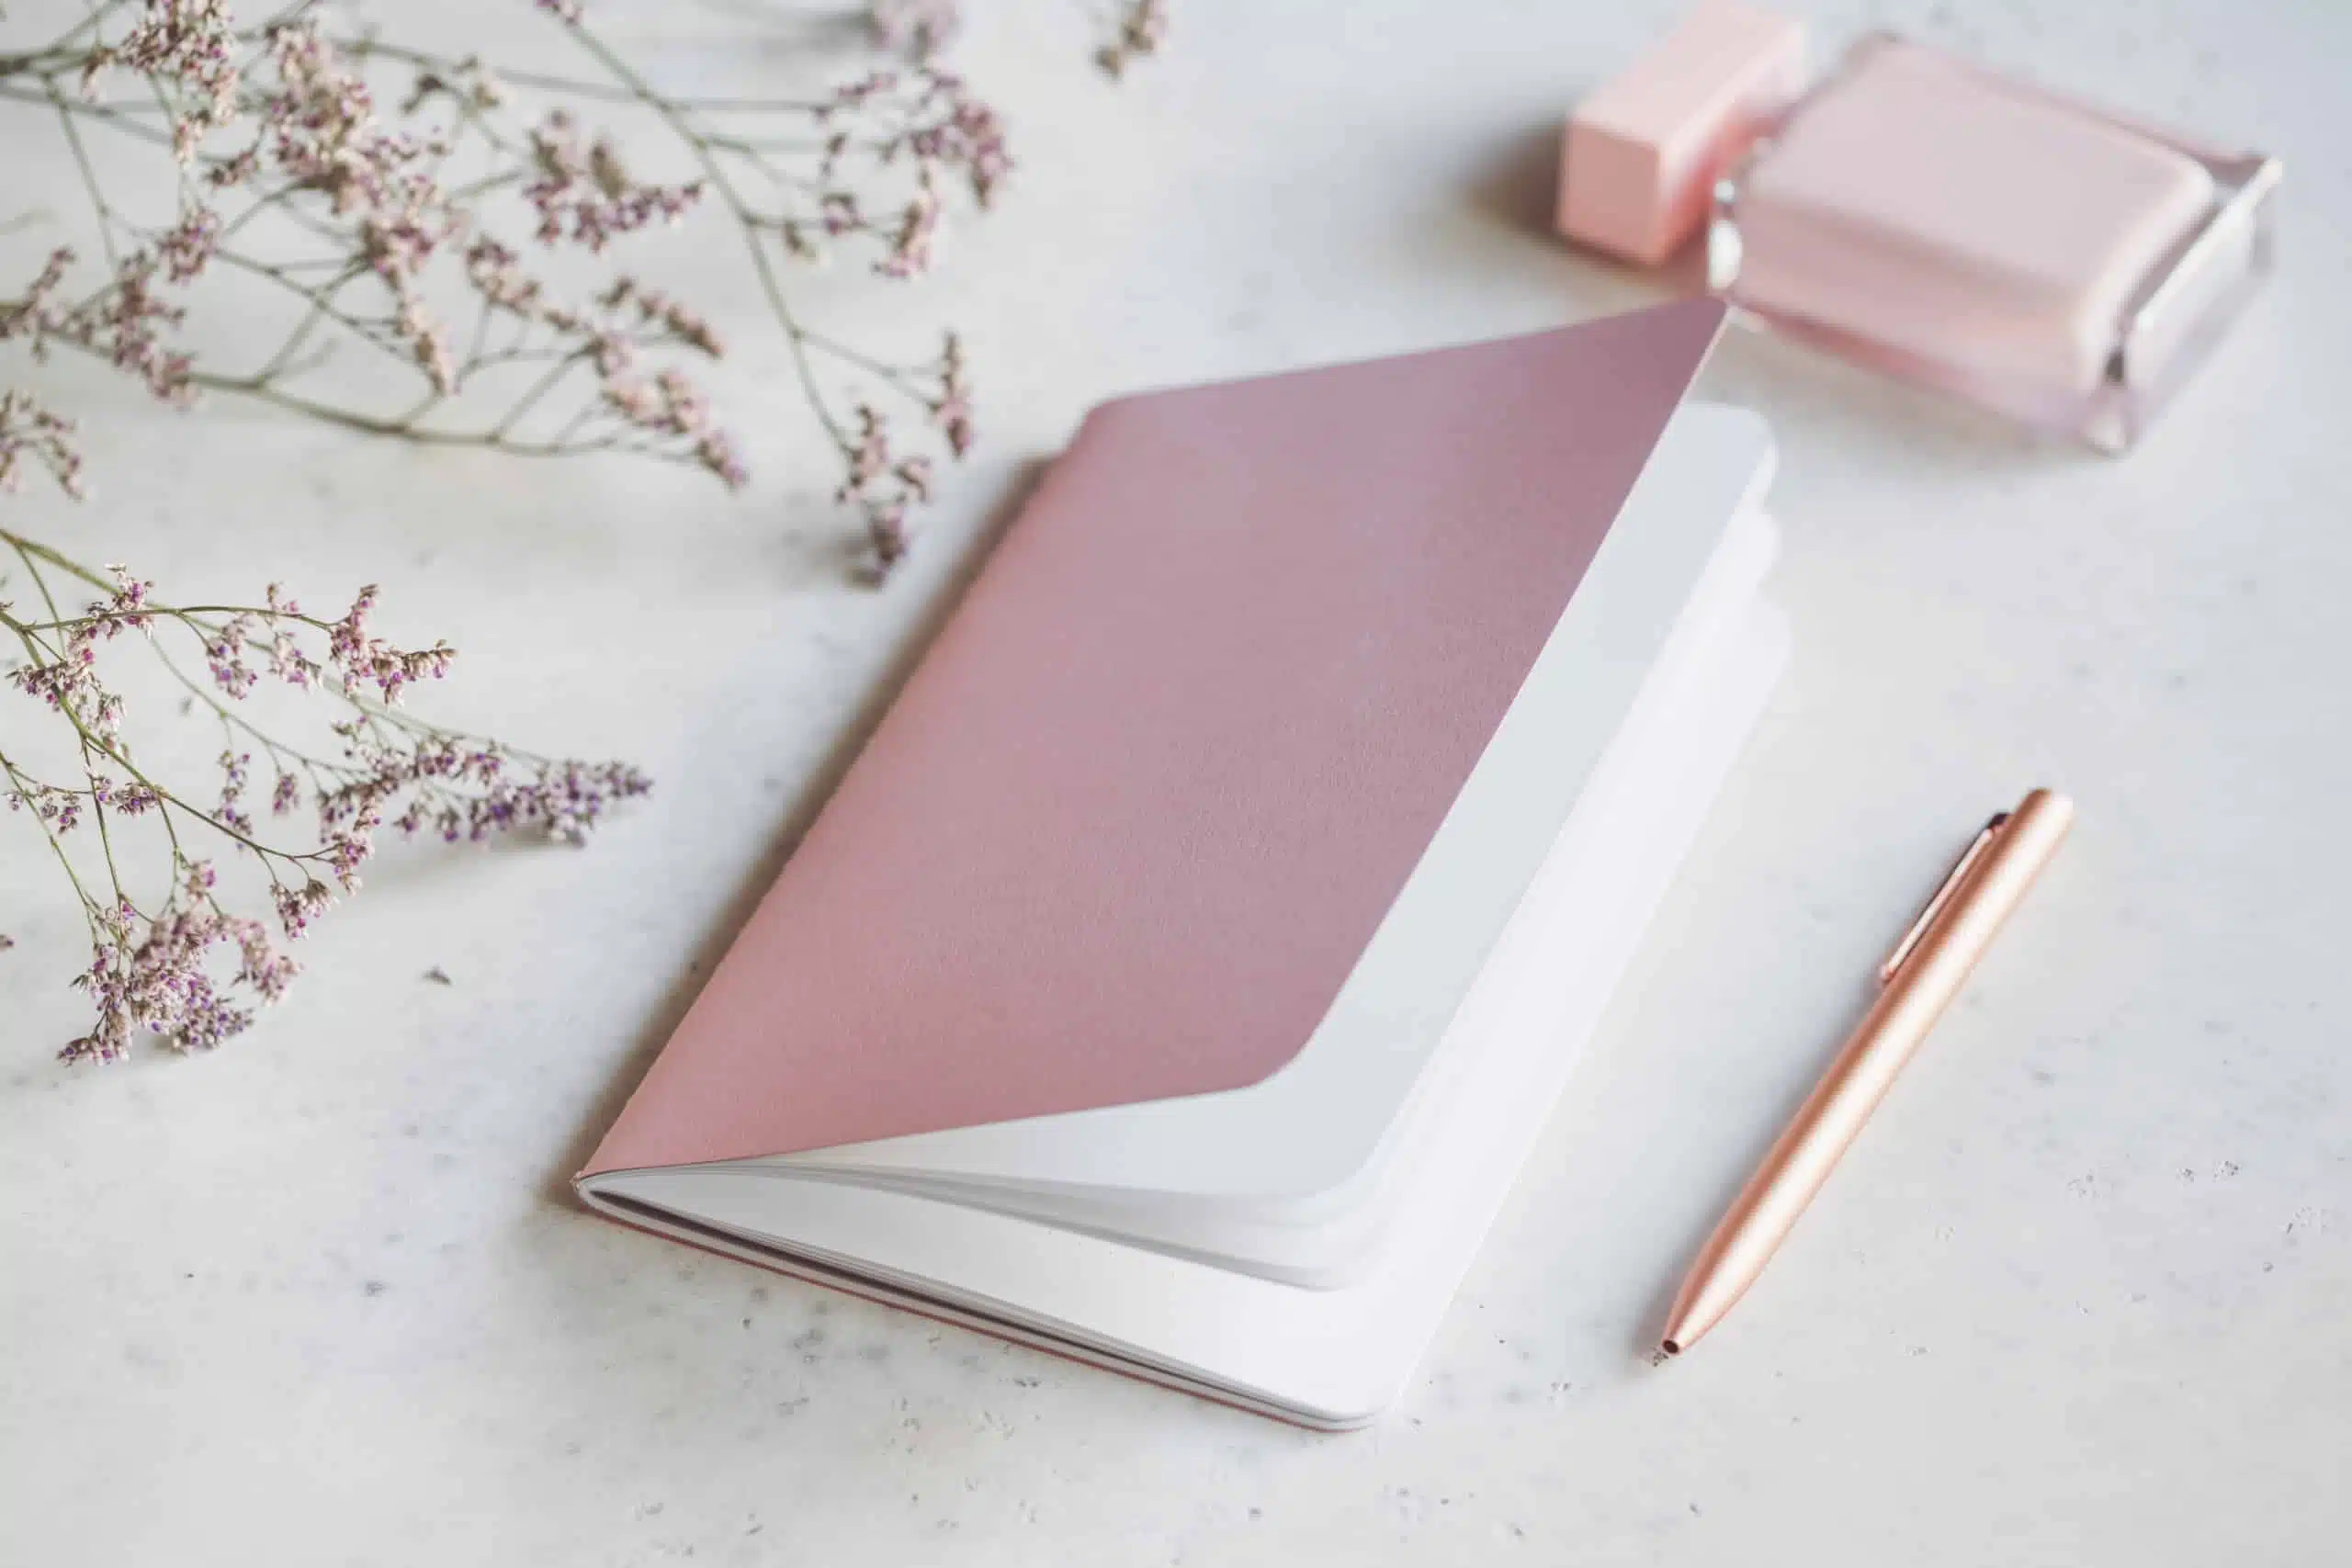 Empty pink notebook with golden pen on white table surrounded by flowers and fragrance.